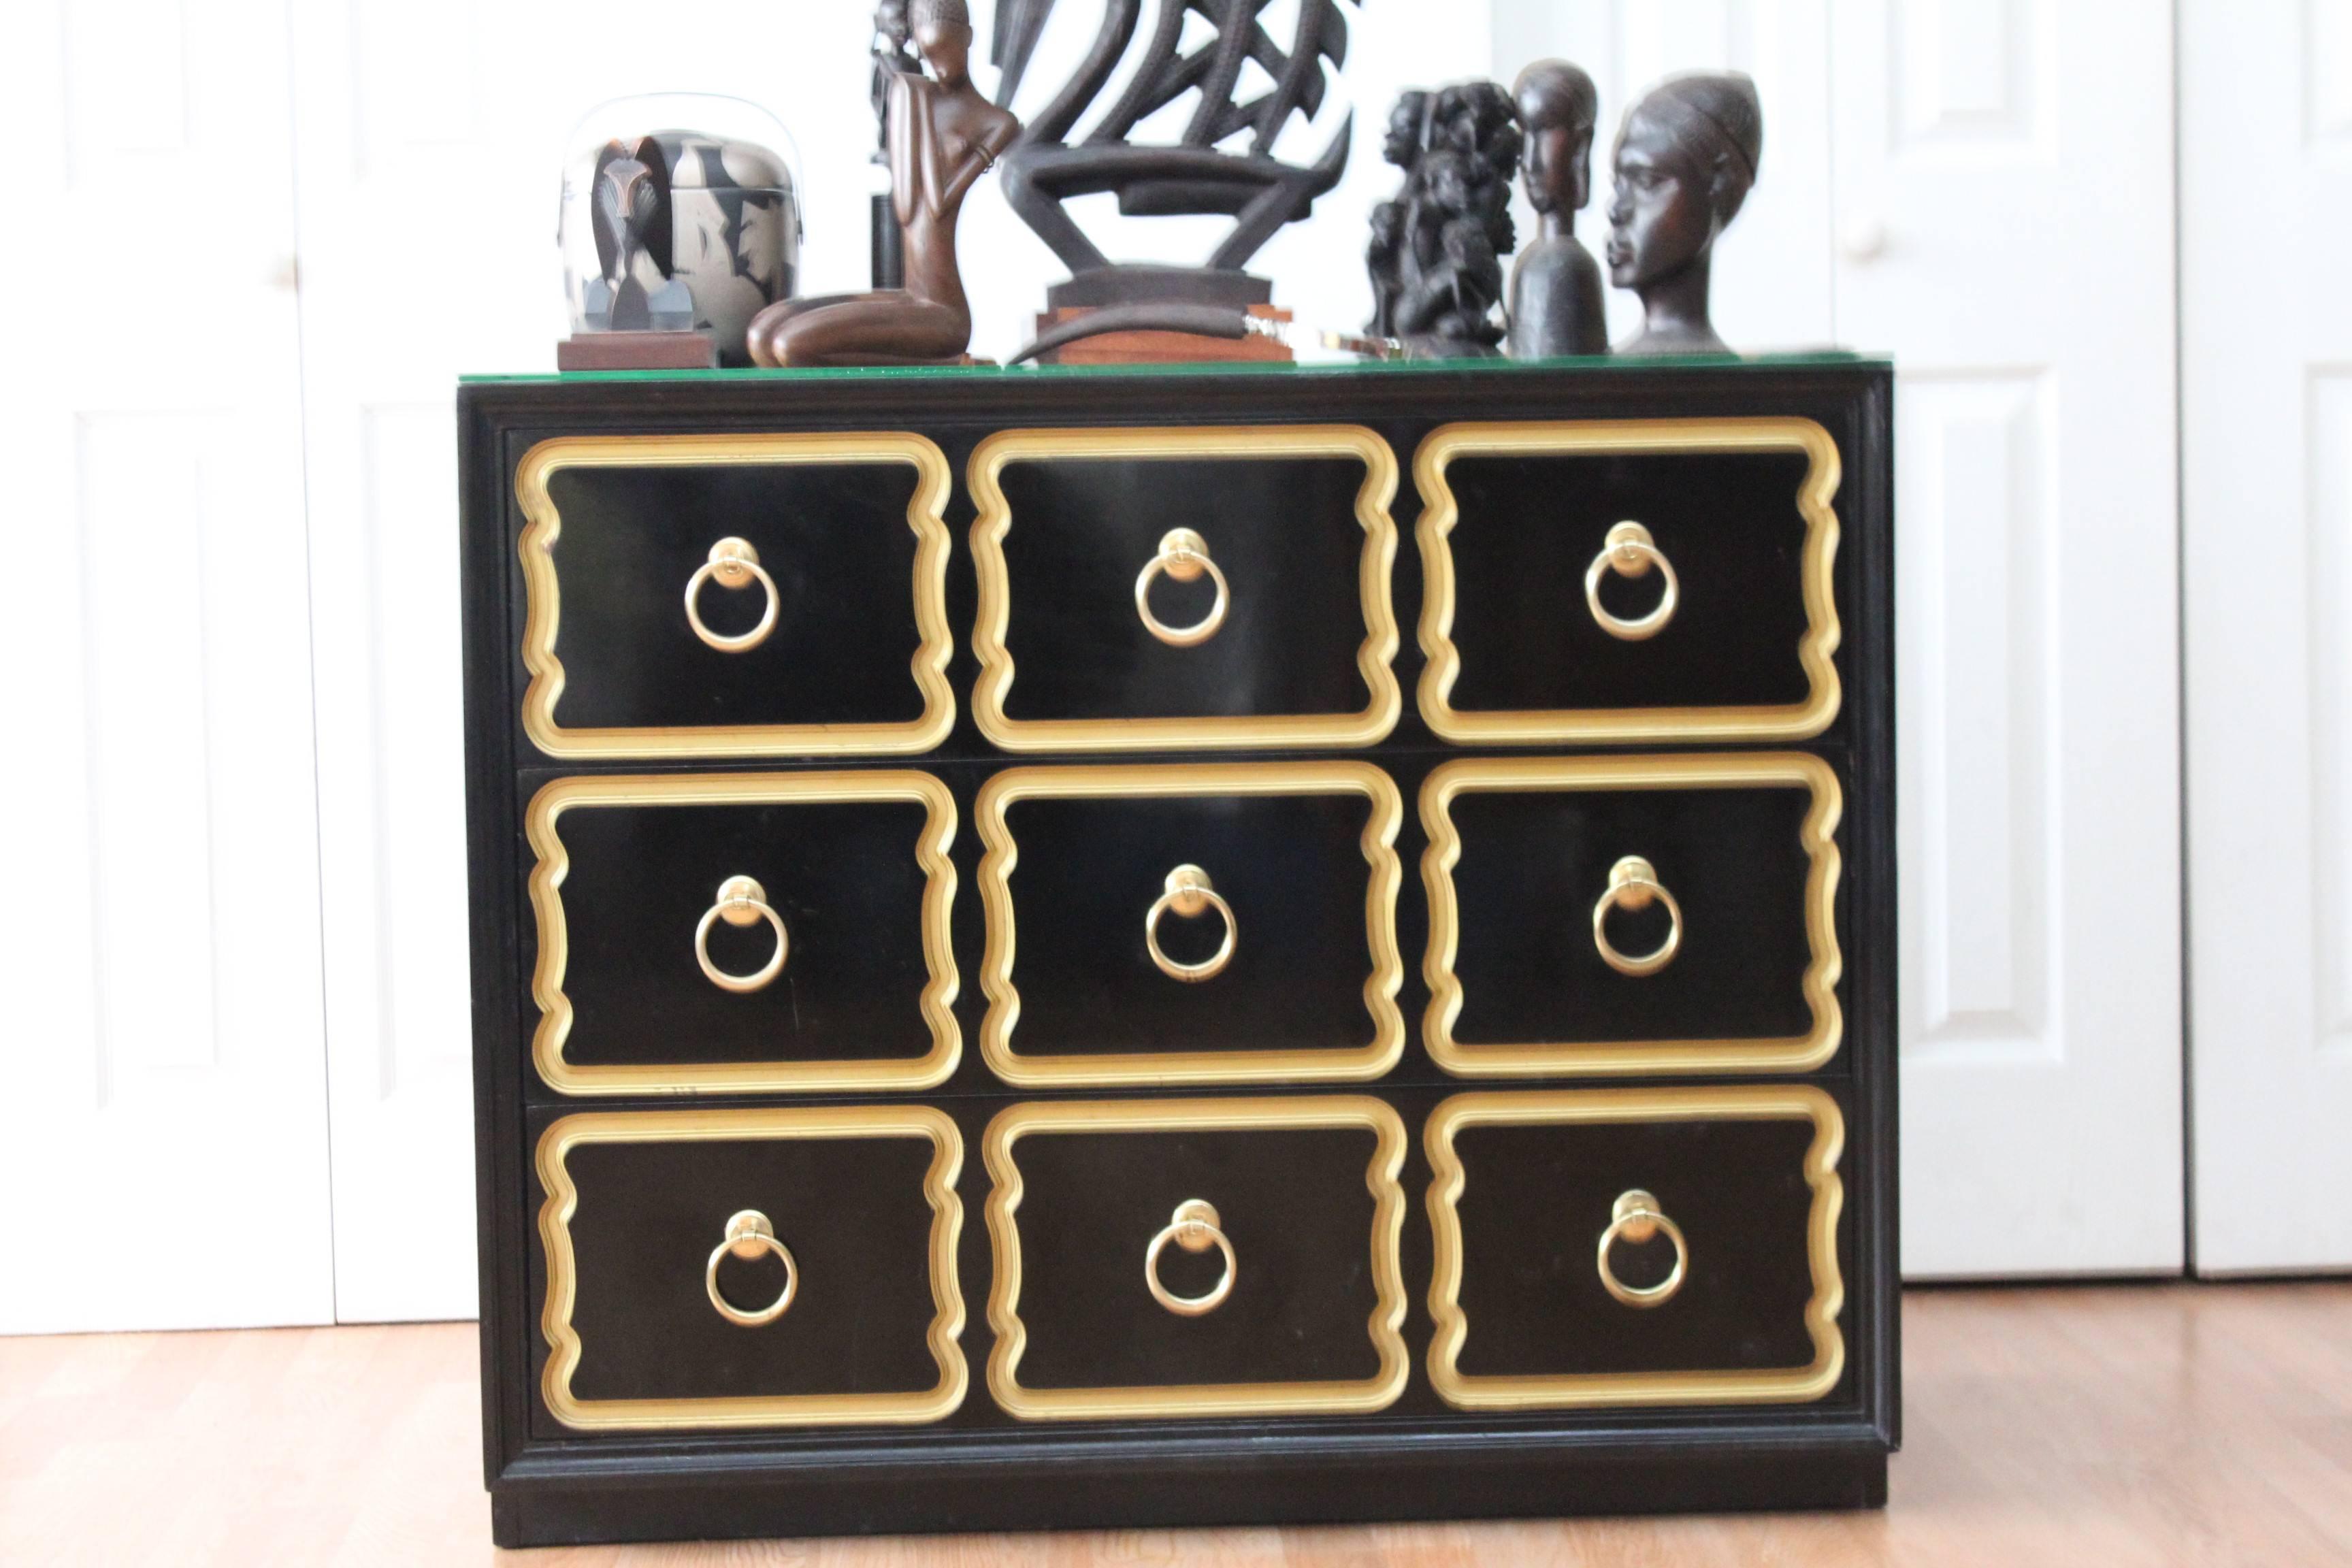 An orange moon is proud to offer this documented, authenticated, vintage original Dorothy Draper piece. 

This incredibly dramatic three-drawer lacquered and giltwood commode or chest is designed by Dorothy Draper, the 